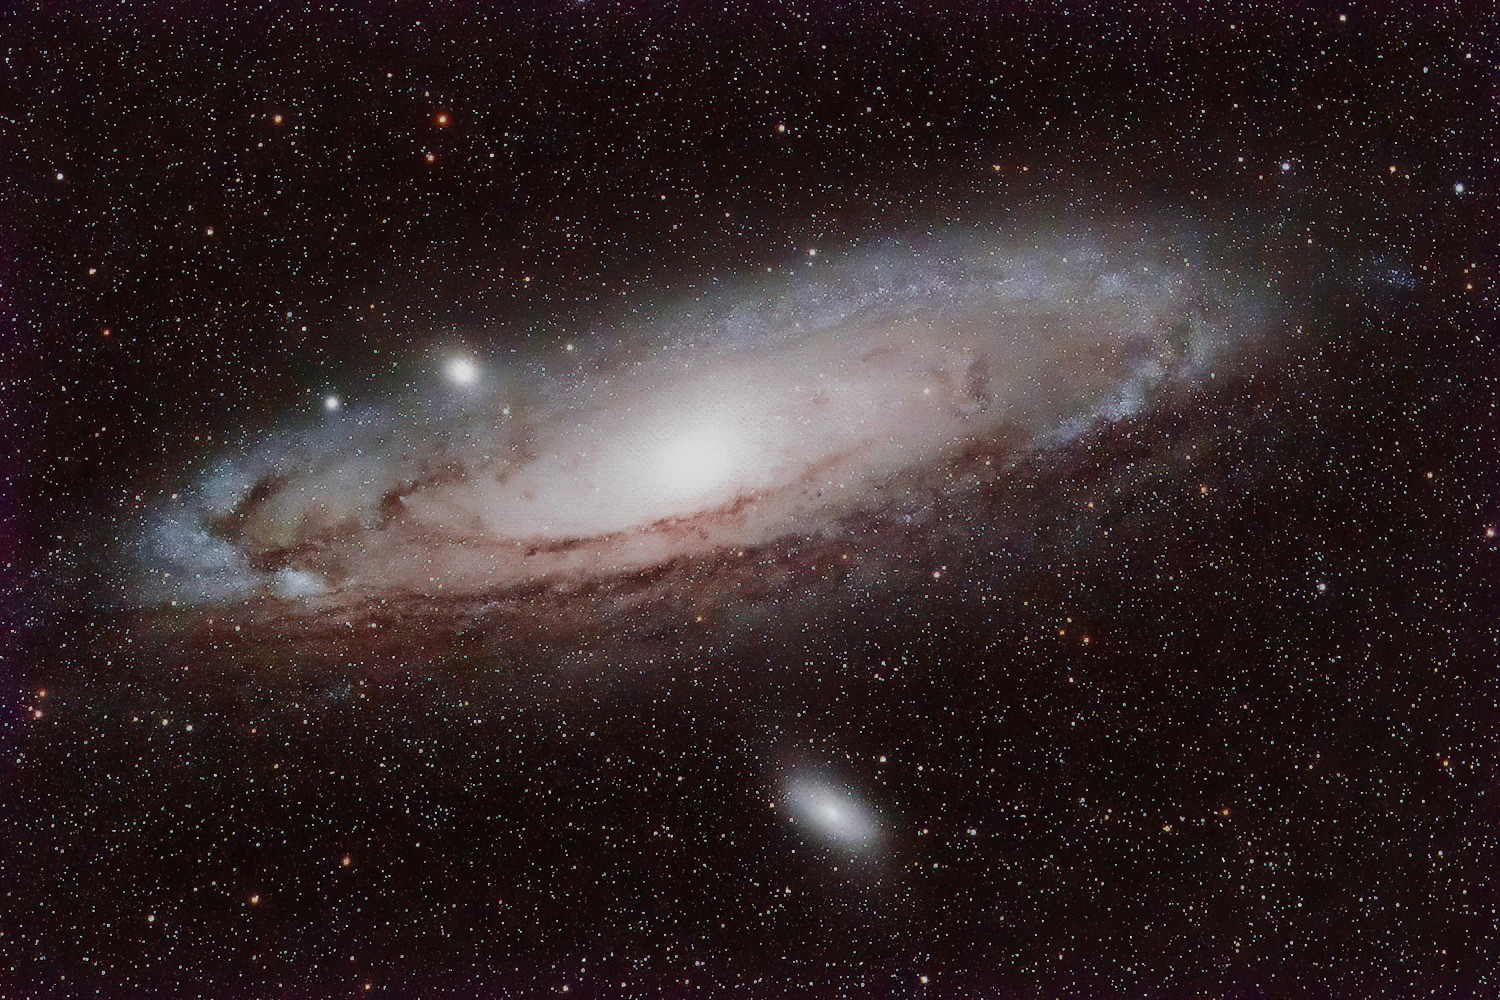 The bright foreshortened disc of the Andromeda Galaxy, with dust lanes visible in silhouette against its bright nucleus. Its much smaller satellite galaxy, M32, is also visible